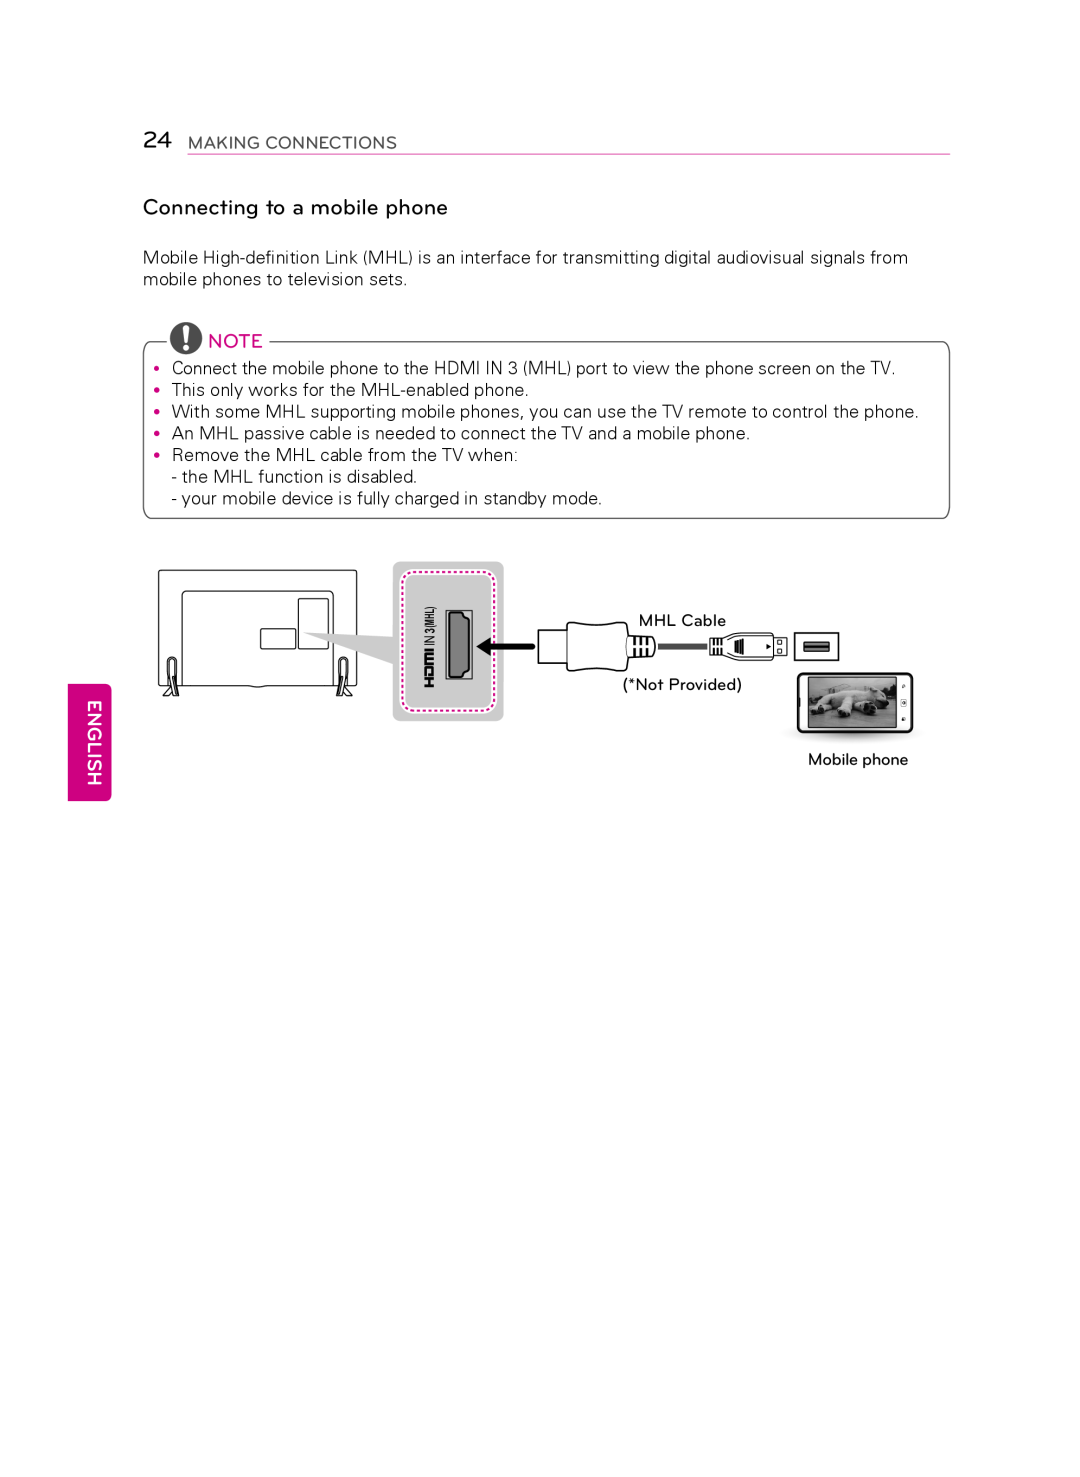 LG Electronics 50LB6300 owner manual Connecting to a mobile phone, English, Making Connections 